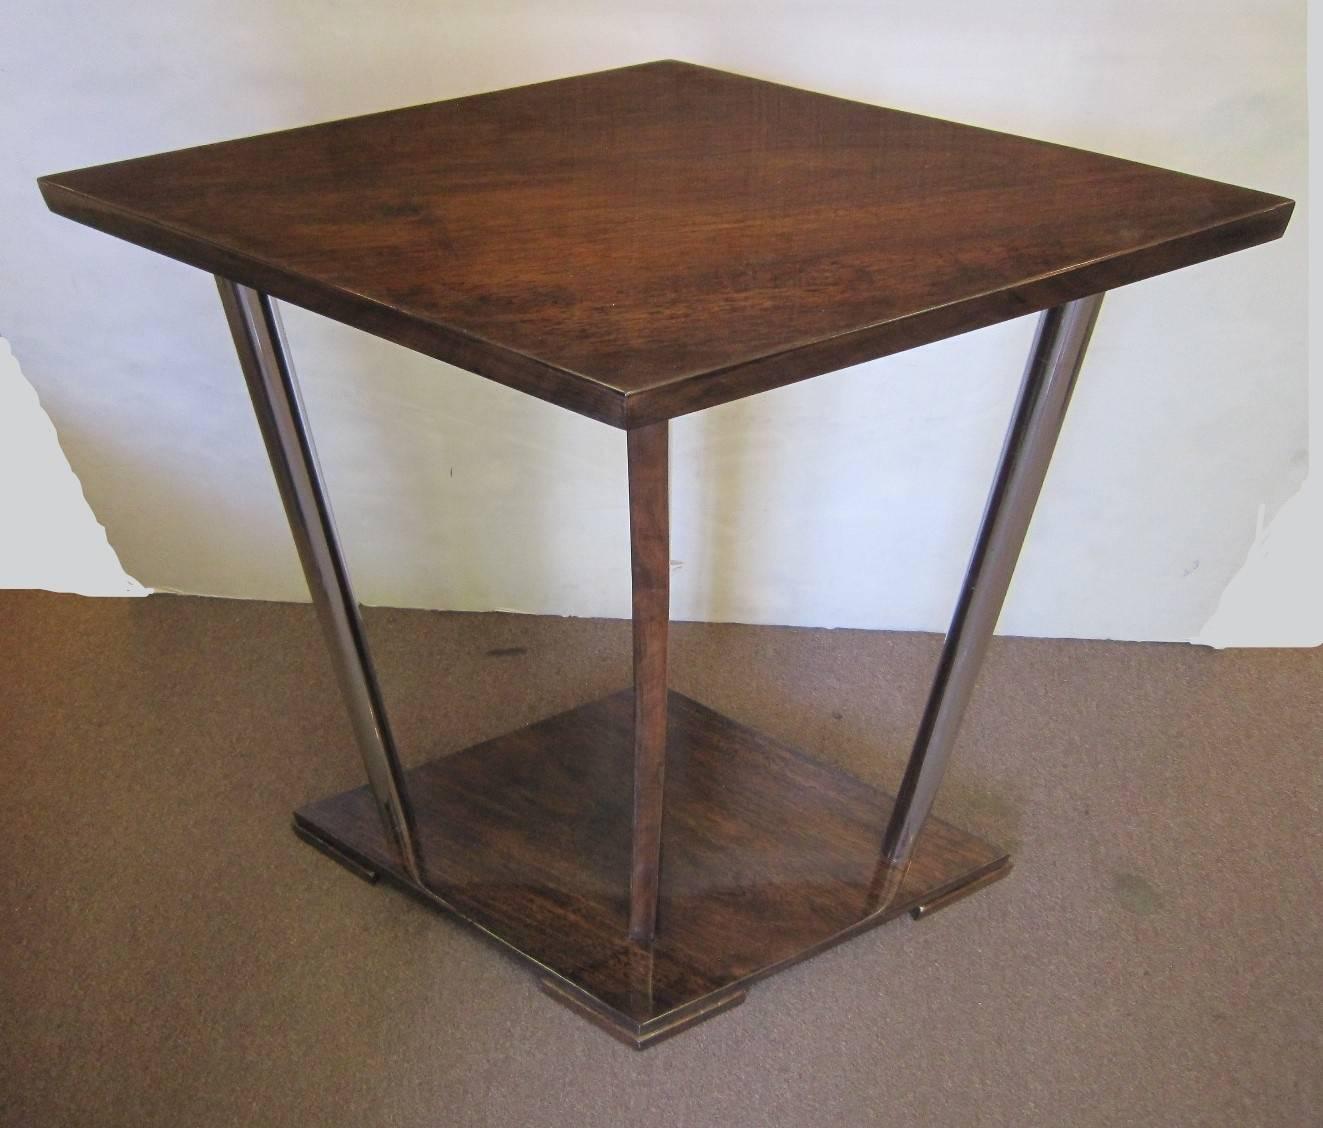 French modernist lacquered walnut side table, architectural in design with cubist lines. The diamond shaped top is held by decorative nickeled bronze tubular supports and a central slab brace, ending in a matching diamond base.
Attributed to Andre